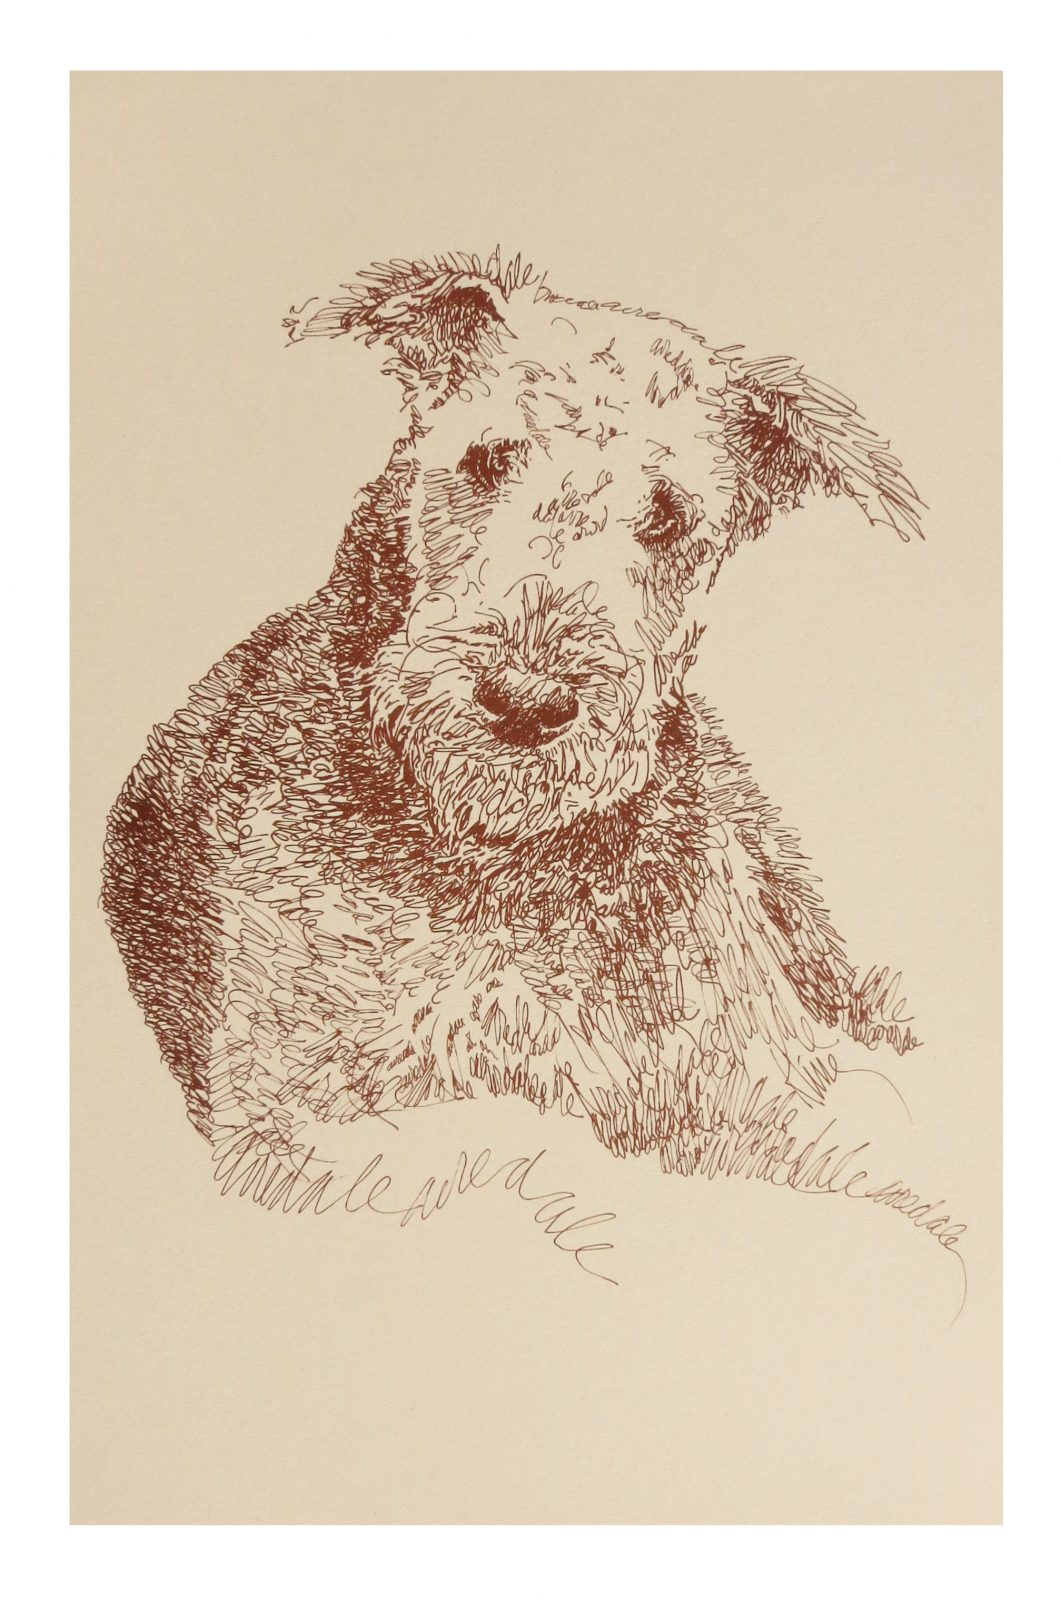 Airedale Terrier dog art portrait drawing PRINT 78 Kline adds dog's name free. 